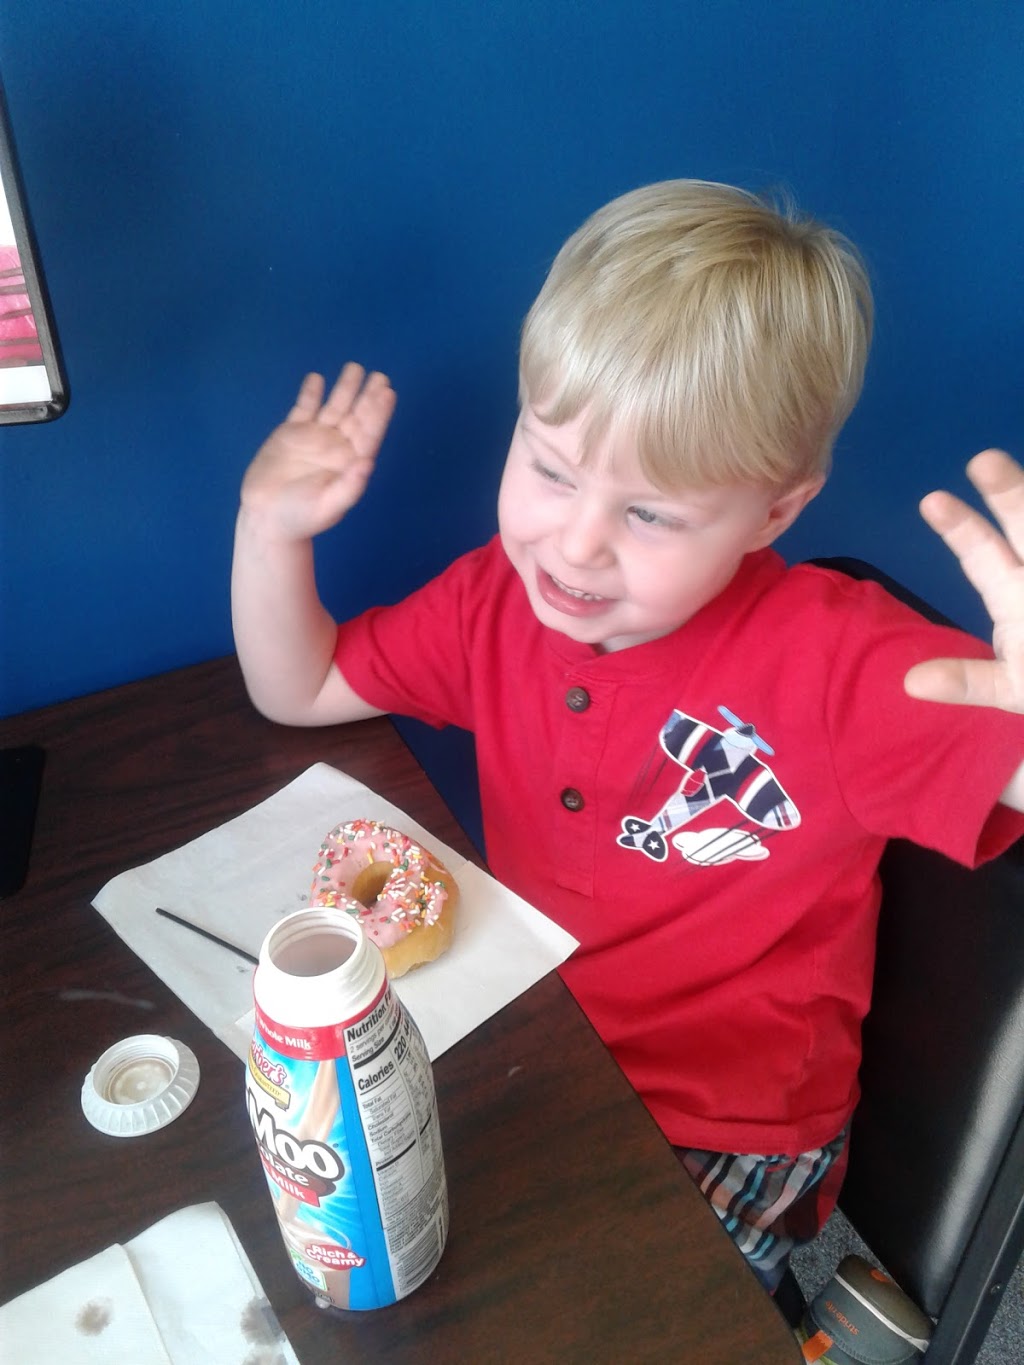 Daily Donuts | 6736 Deerfoot Pkwy, Pinson, AL 35126, USA | Phone: (205) 687-7131